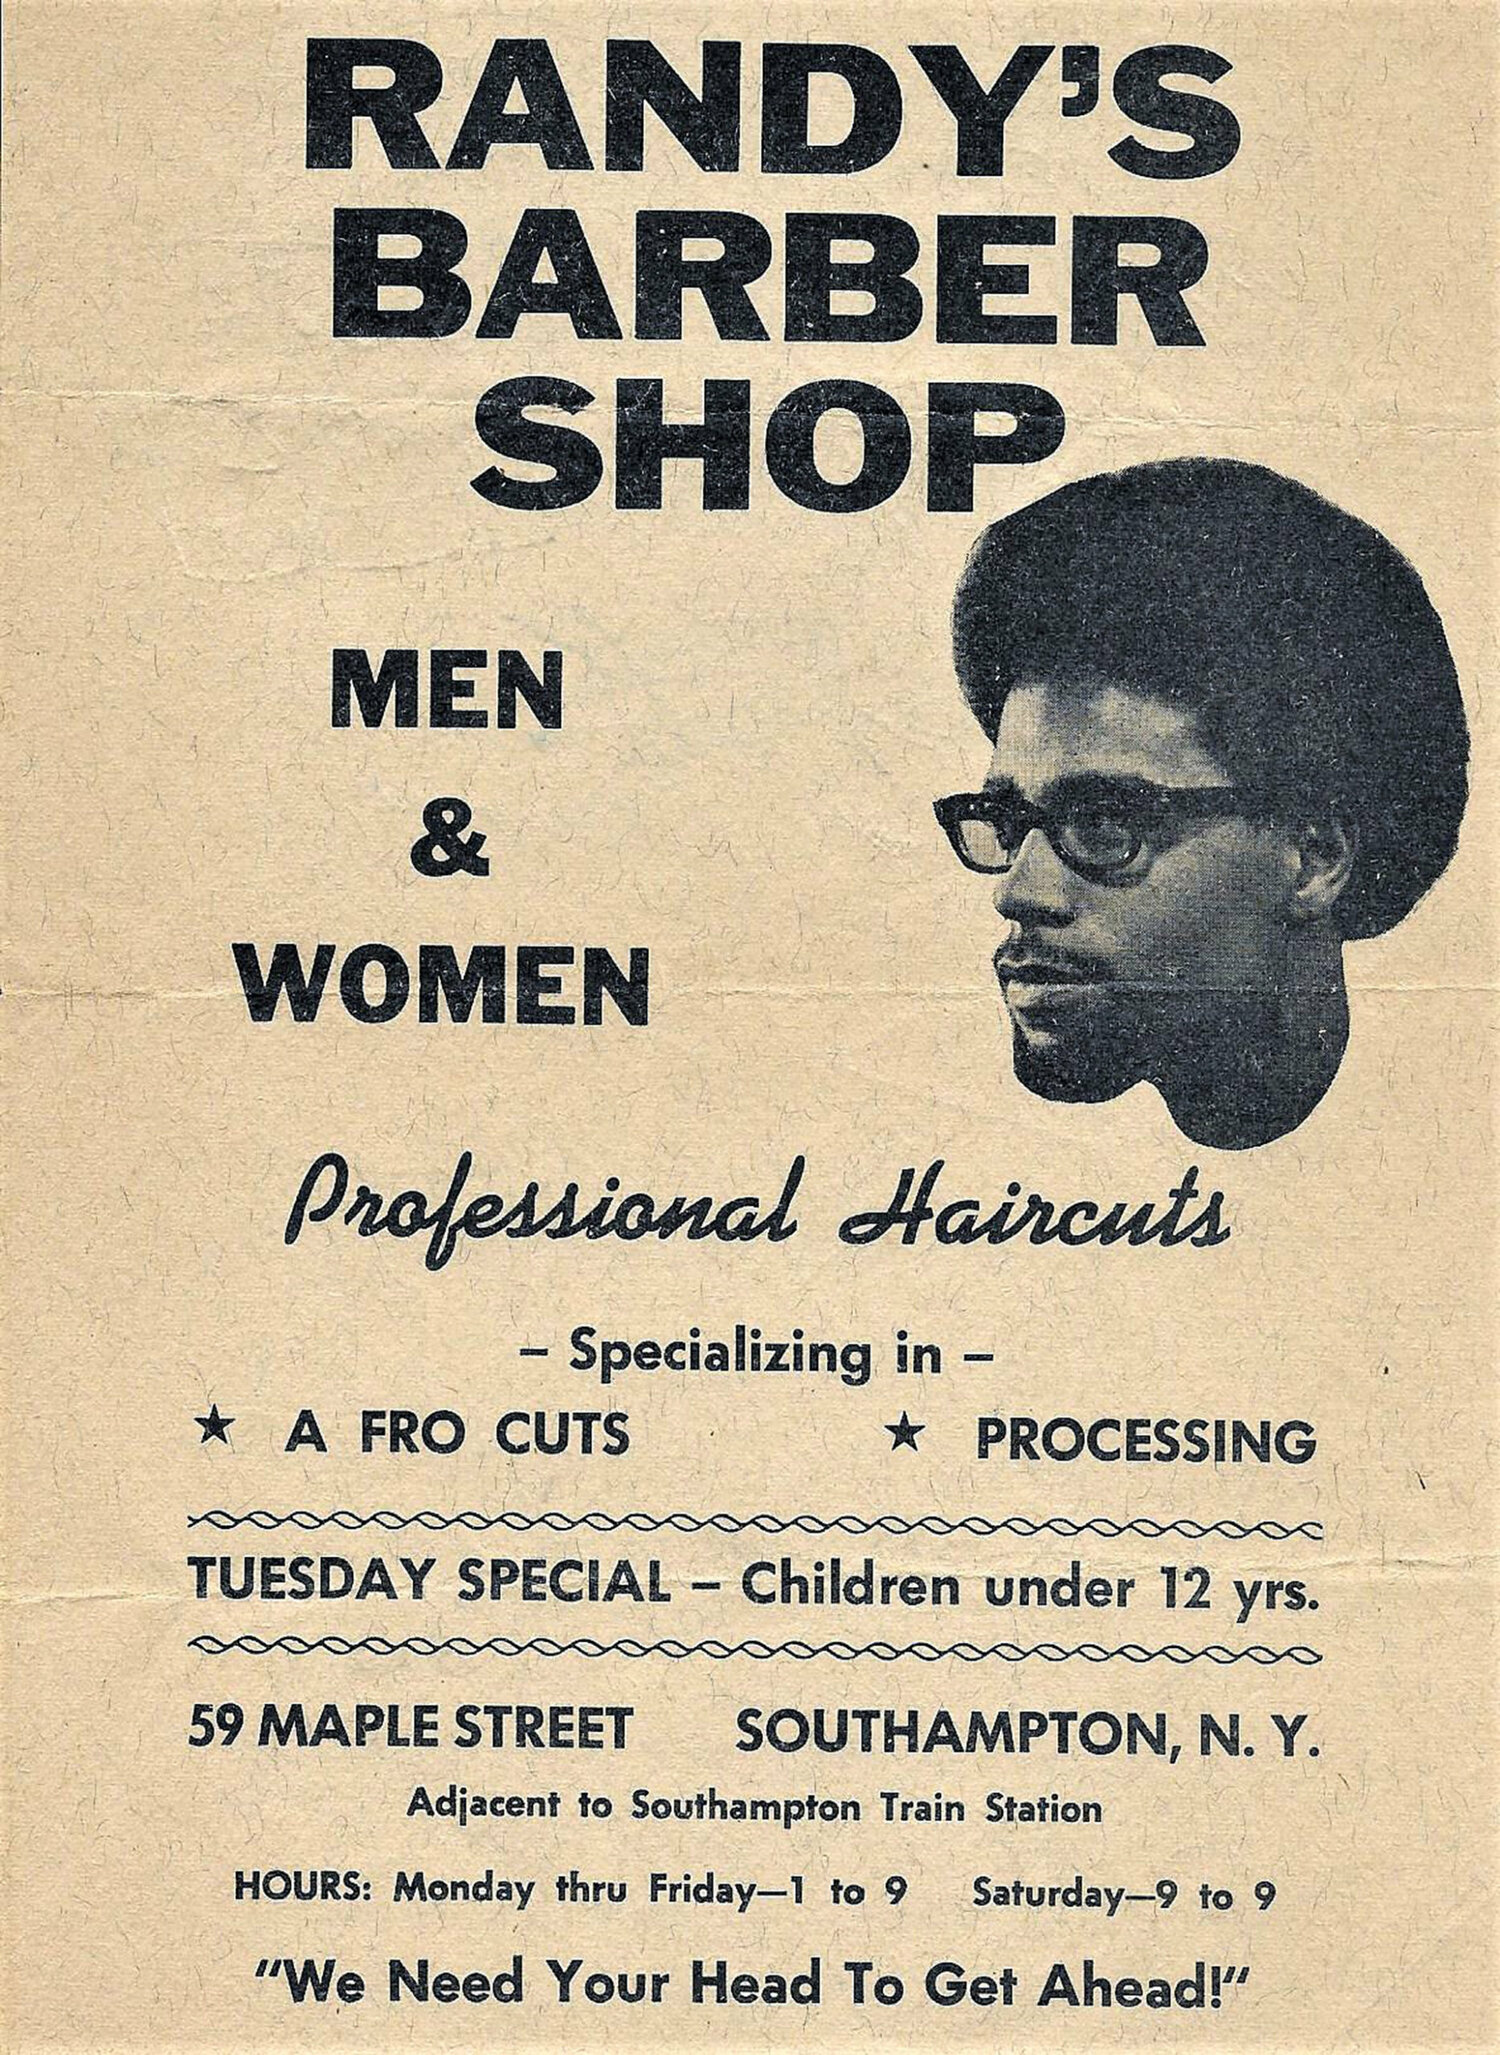 An advertisement for Randy's Barber Shop, which also included a beauty salon for women.